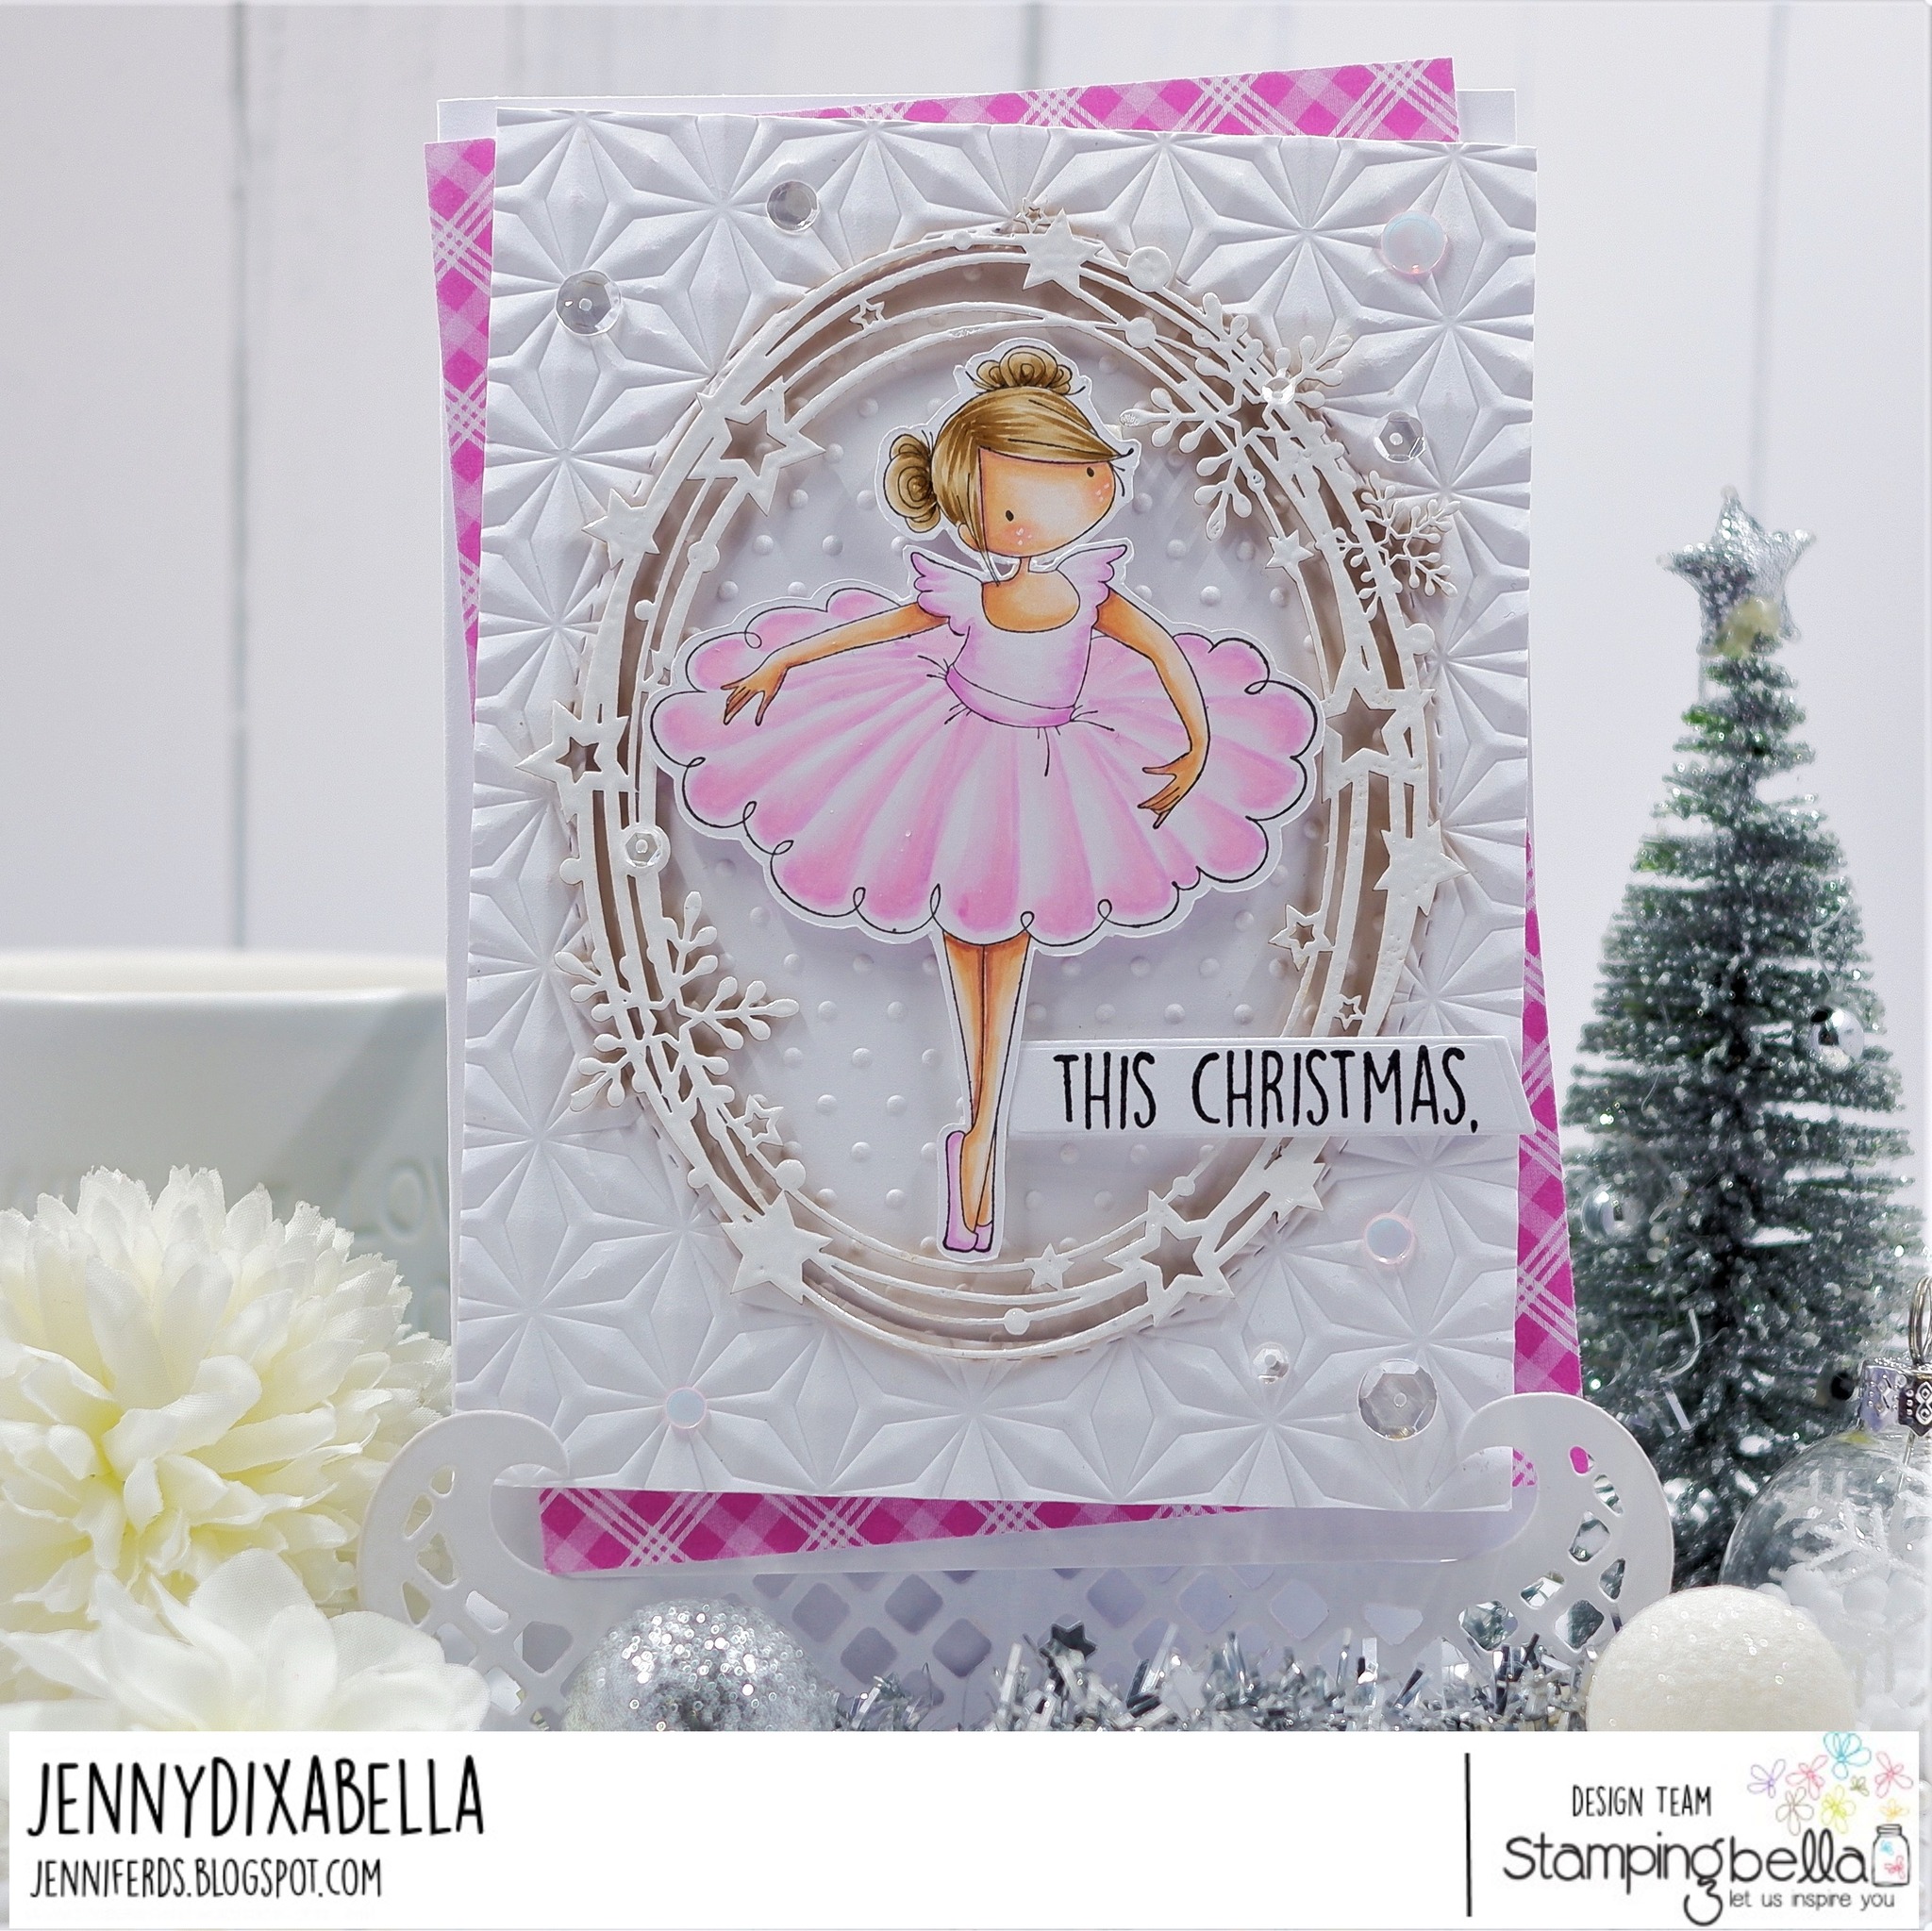 www.stampingbella.com: rubber stamp used: TINY TOWNIE NATALIE AND THE NUTCRACKER card by Jenny Dix